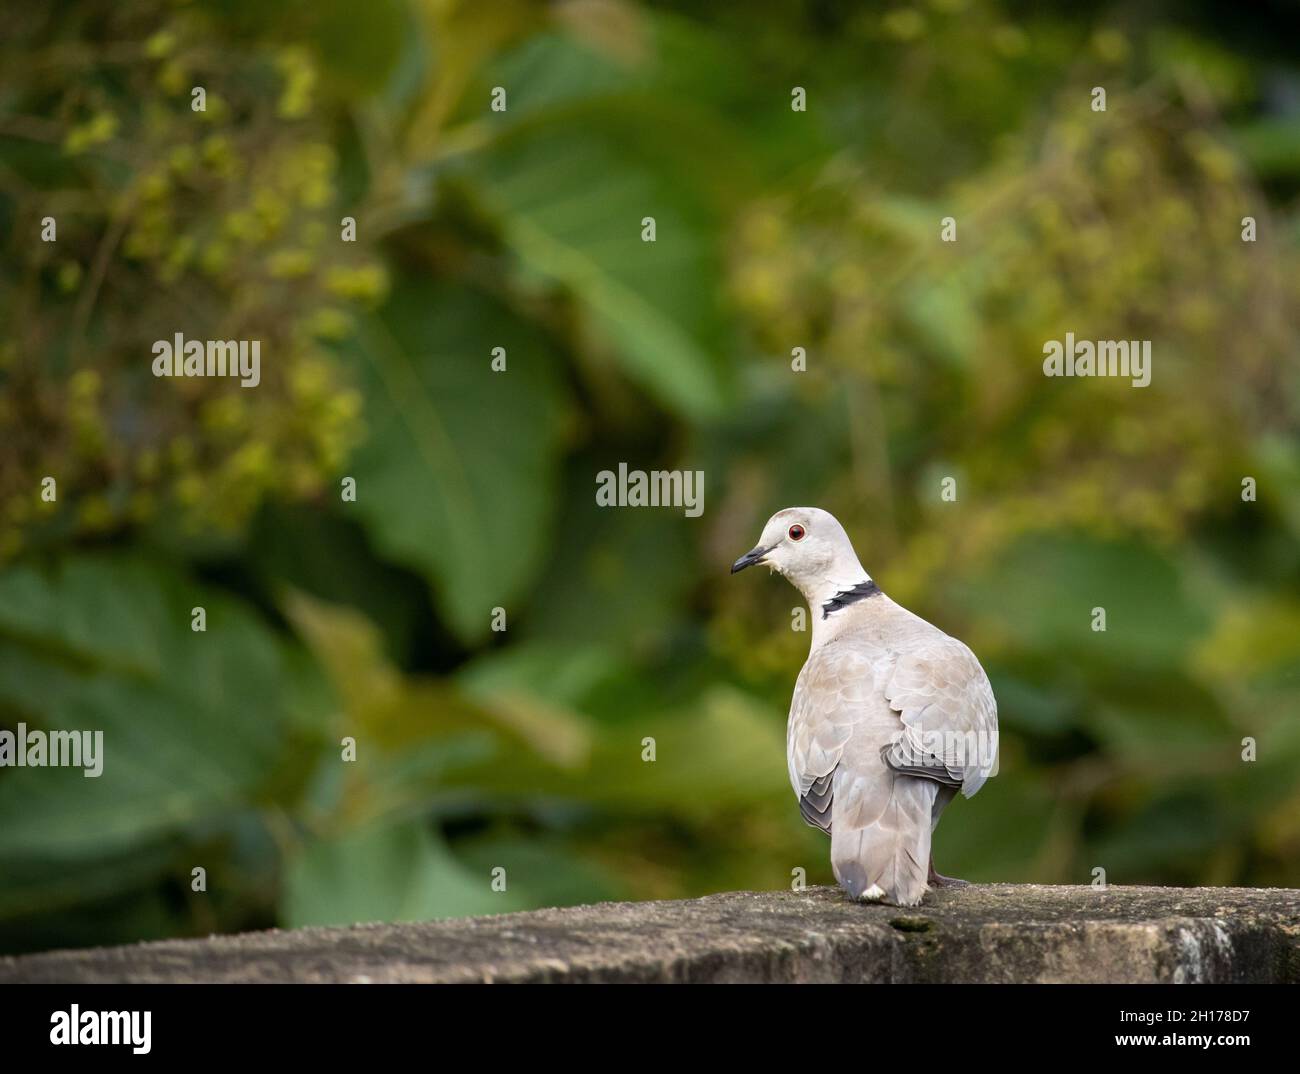 An Indian gray colored dove perching on rooftop on blurry green background Stock Photo